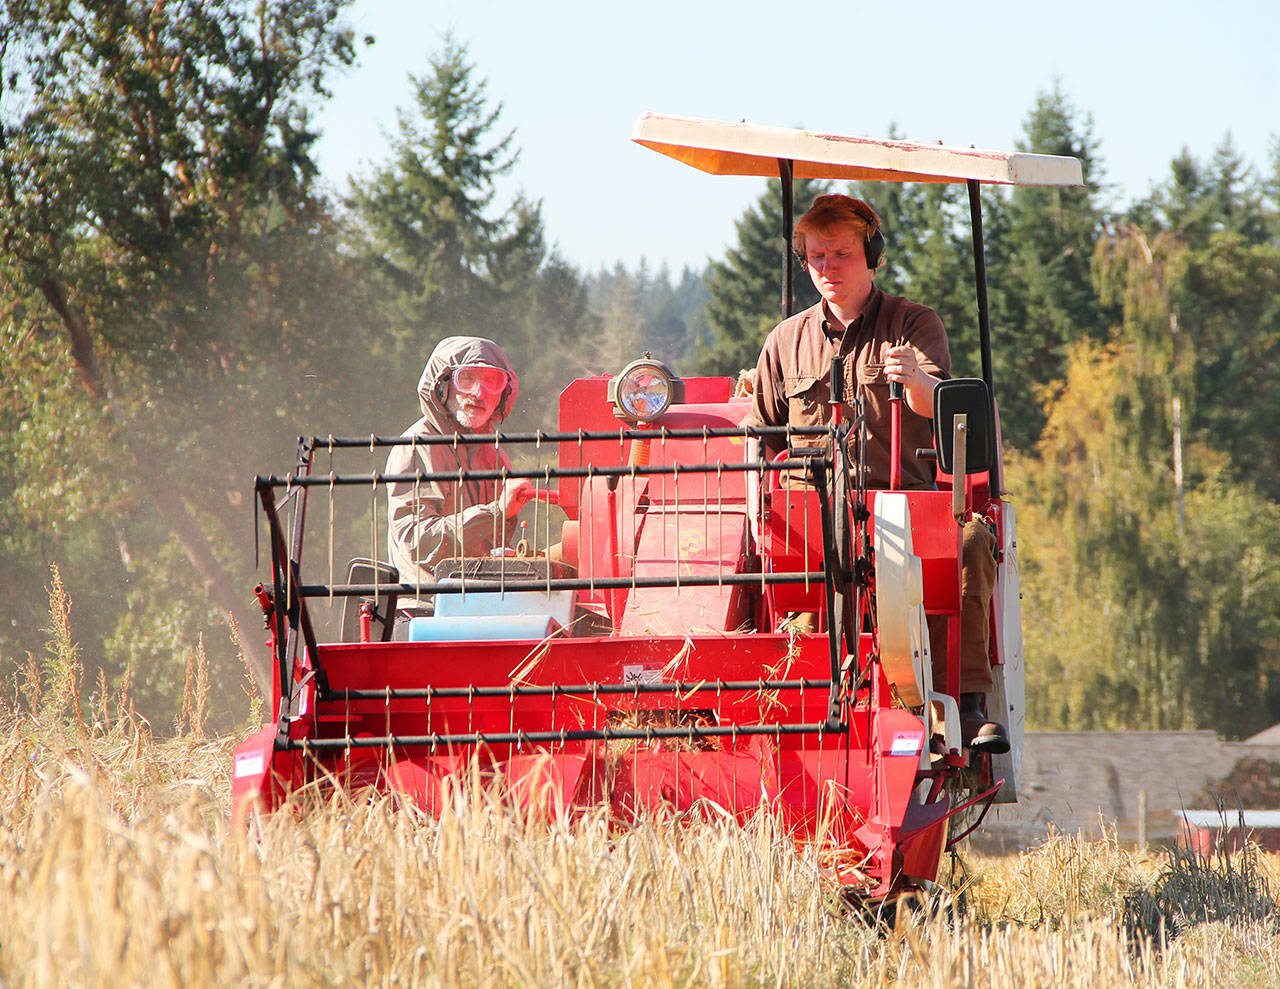 Islander Jacob Green (right) and Cliff Goodman of Vashon Brewing Company (left) use a combine to harvest barley last Thursday. Goodman is planning to incorporate the locally grown barley into his existing beer recipes and eventually experiment with other varieties that thrive in Western Washington. (Anneli Fogt/Staff Photo)